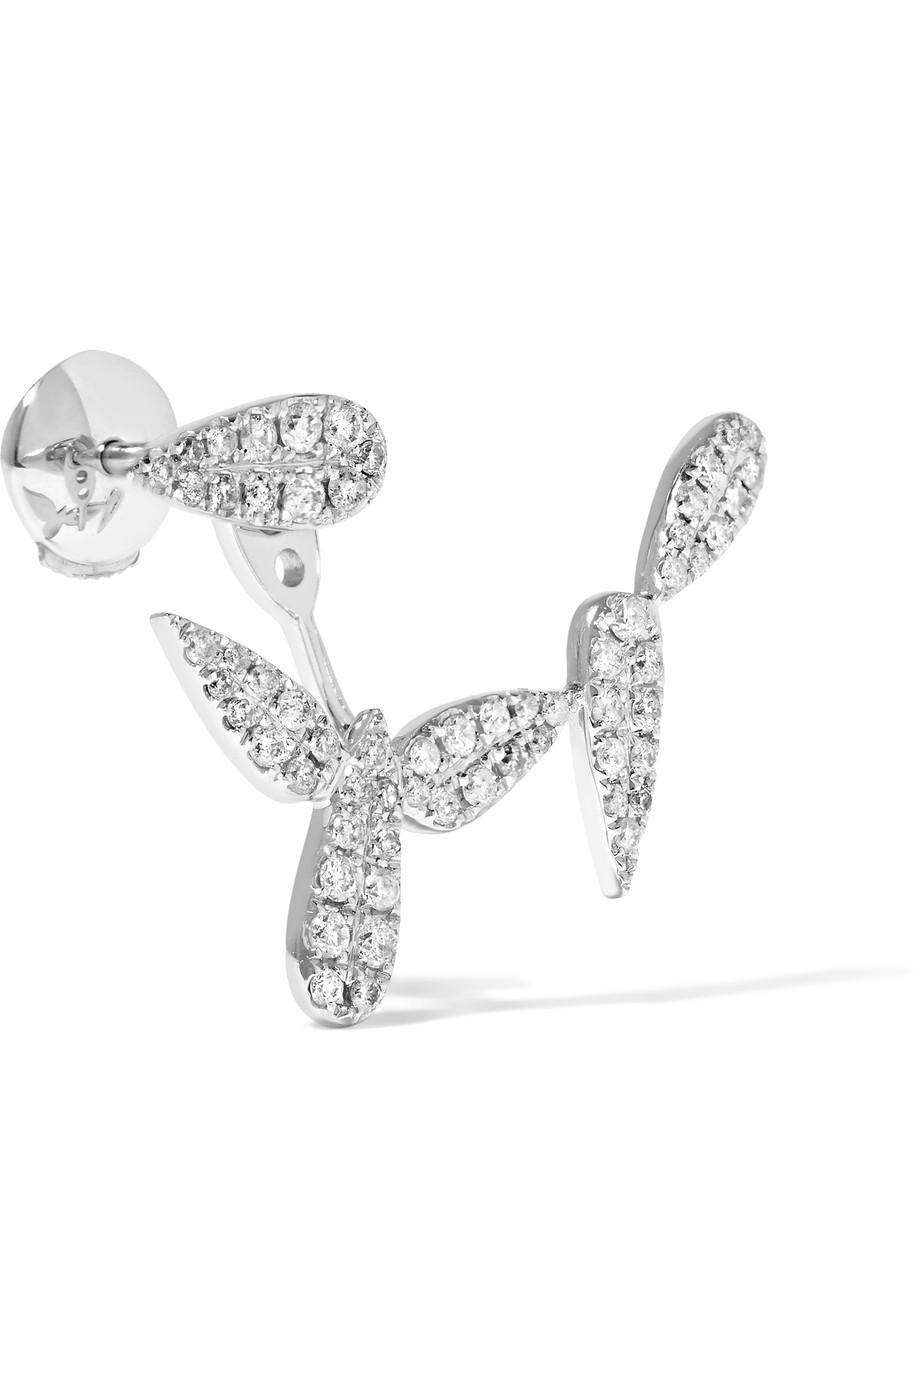 Women's Yvonne Leon Contemporary Stud and Ear Jacket in 18 Karat White Gold